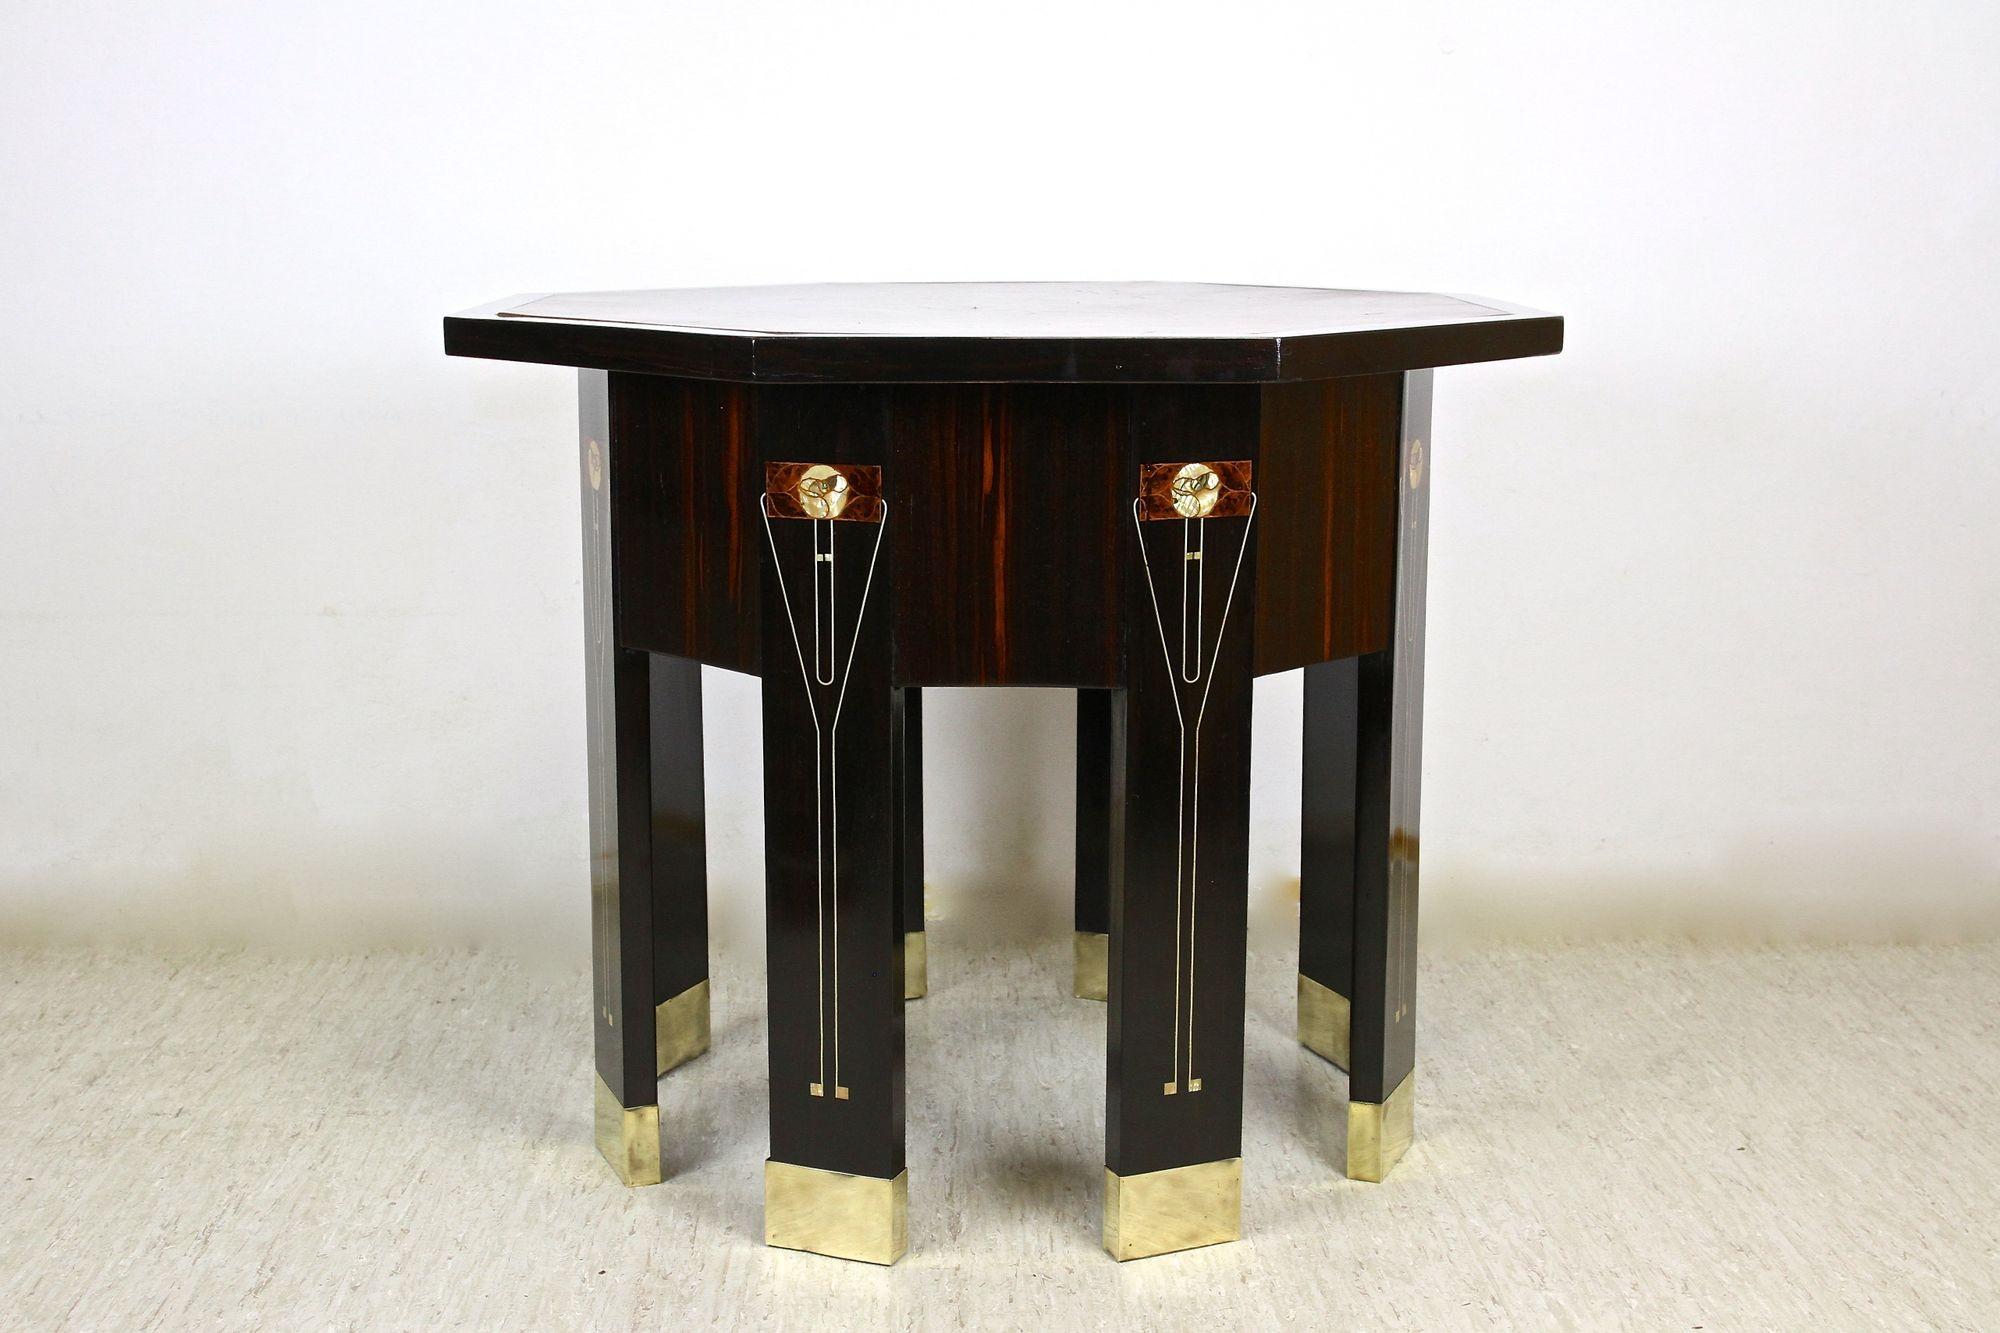 Polished Art Nouveau Octagonal Palisander Table with Mother of Pearl Inlays, AT ca. 1905 For Sale